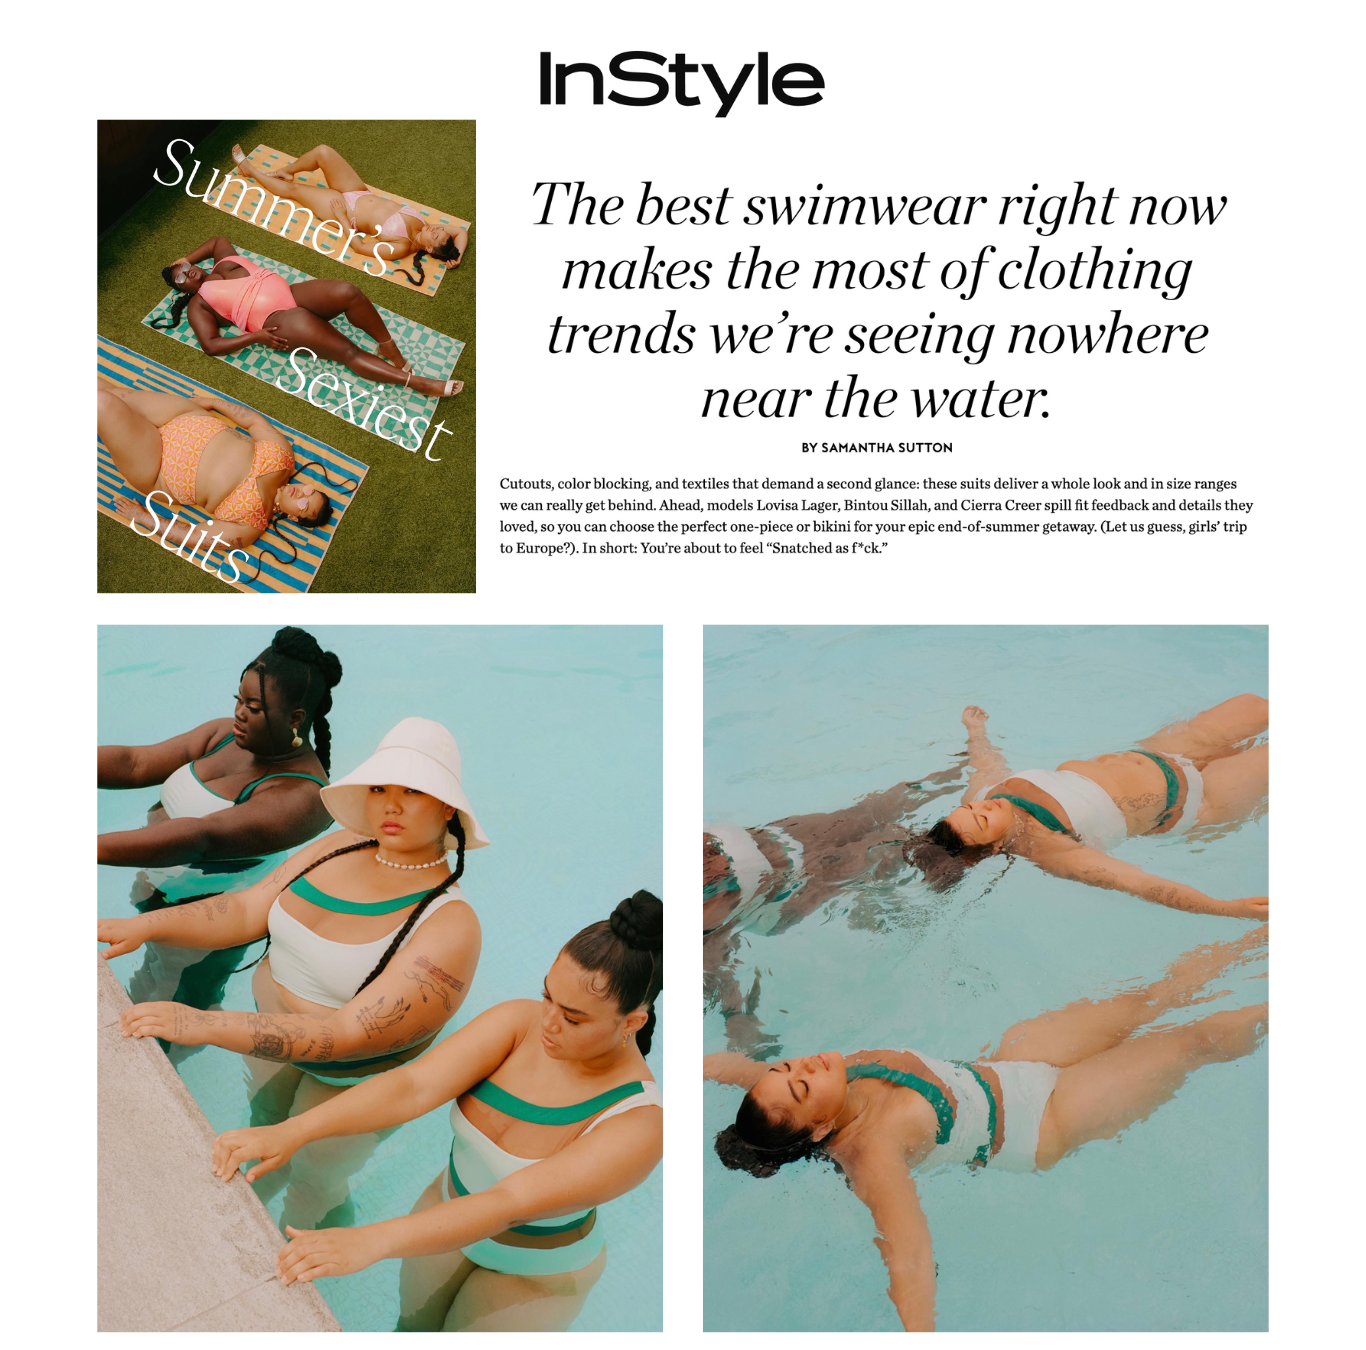 INSTYLE MAGAZINE SUMMER'S SEXIEST SUIT